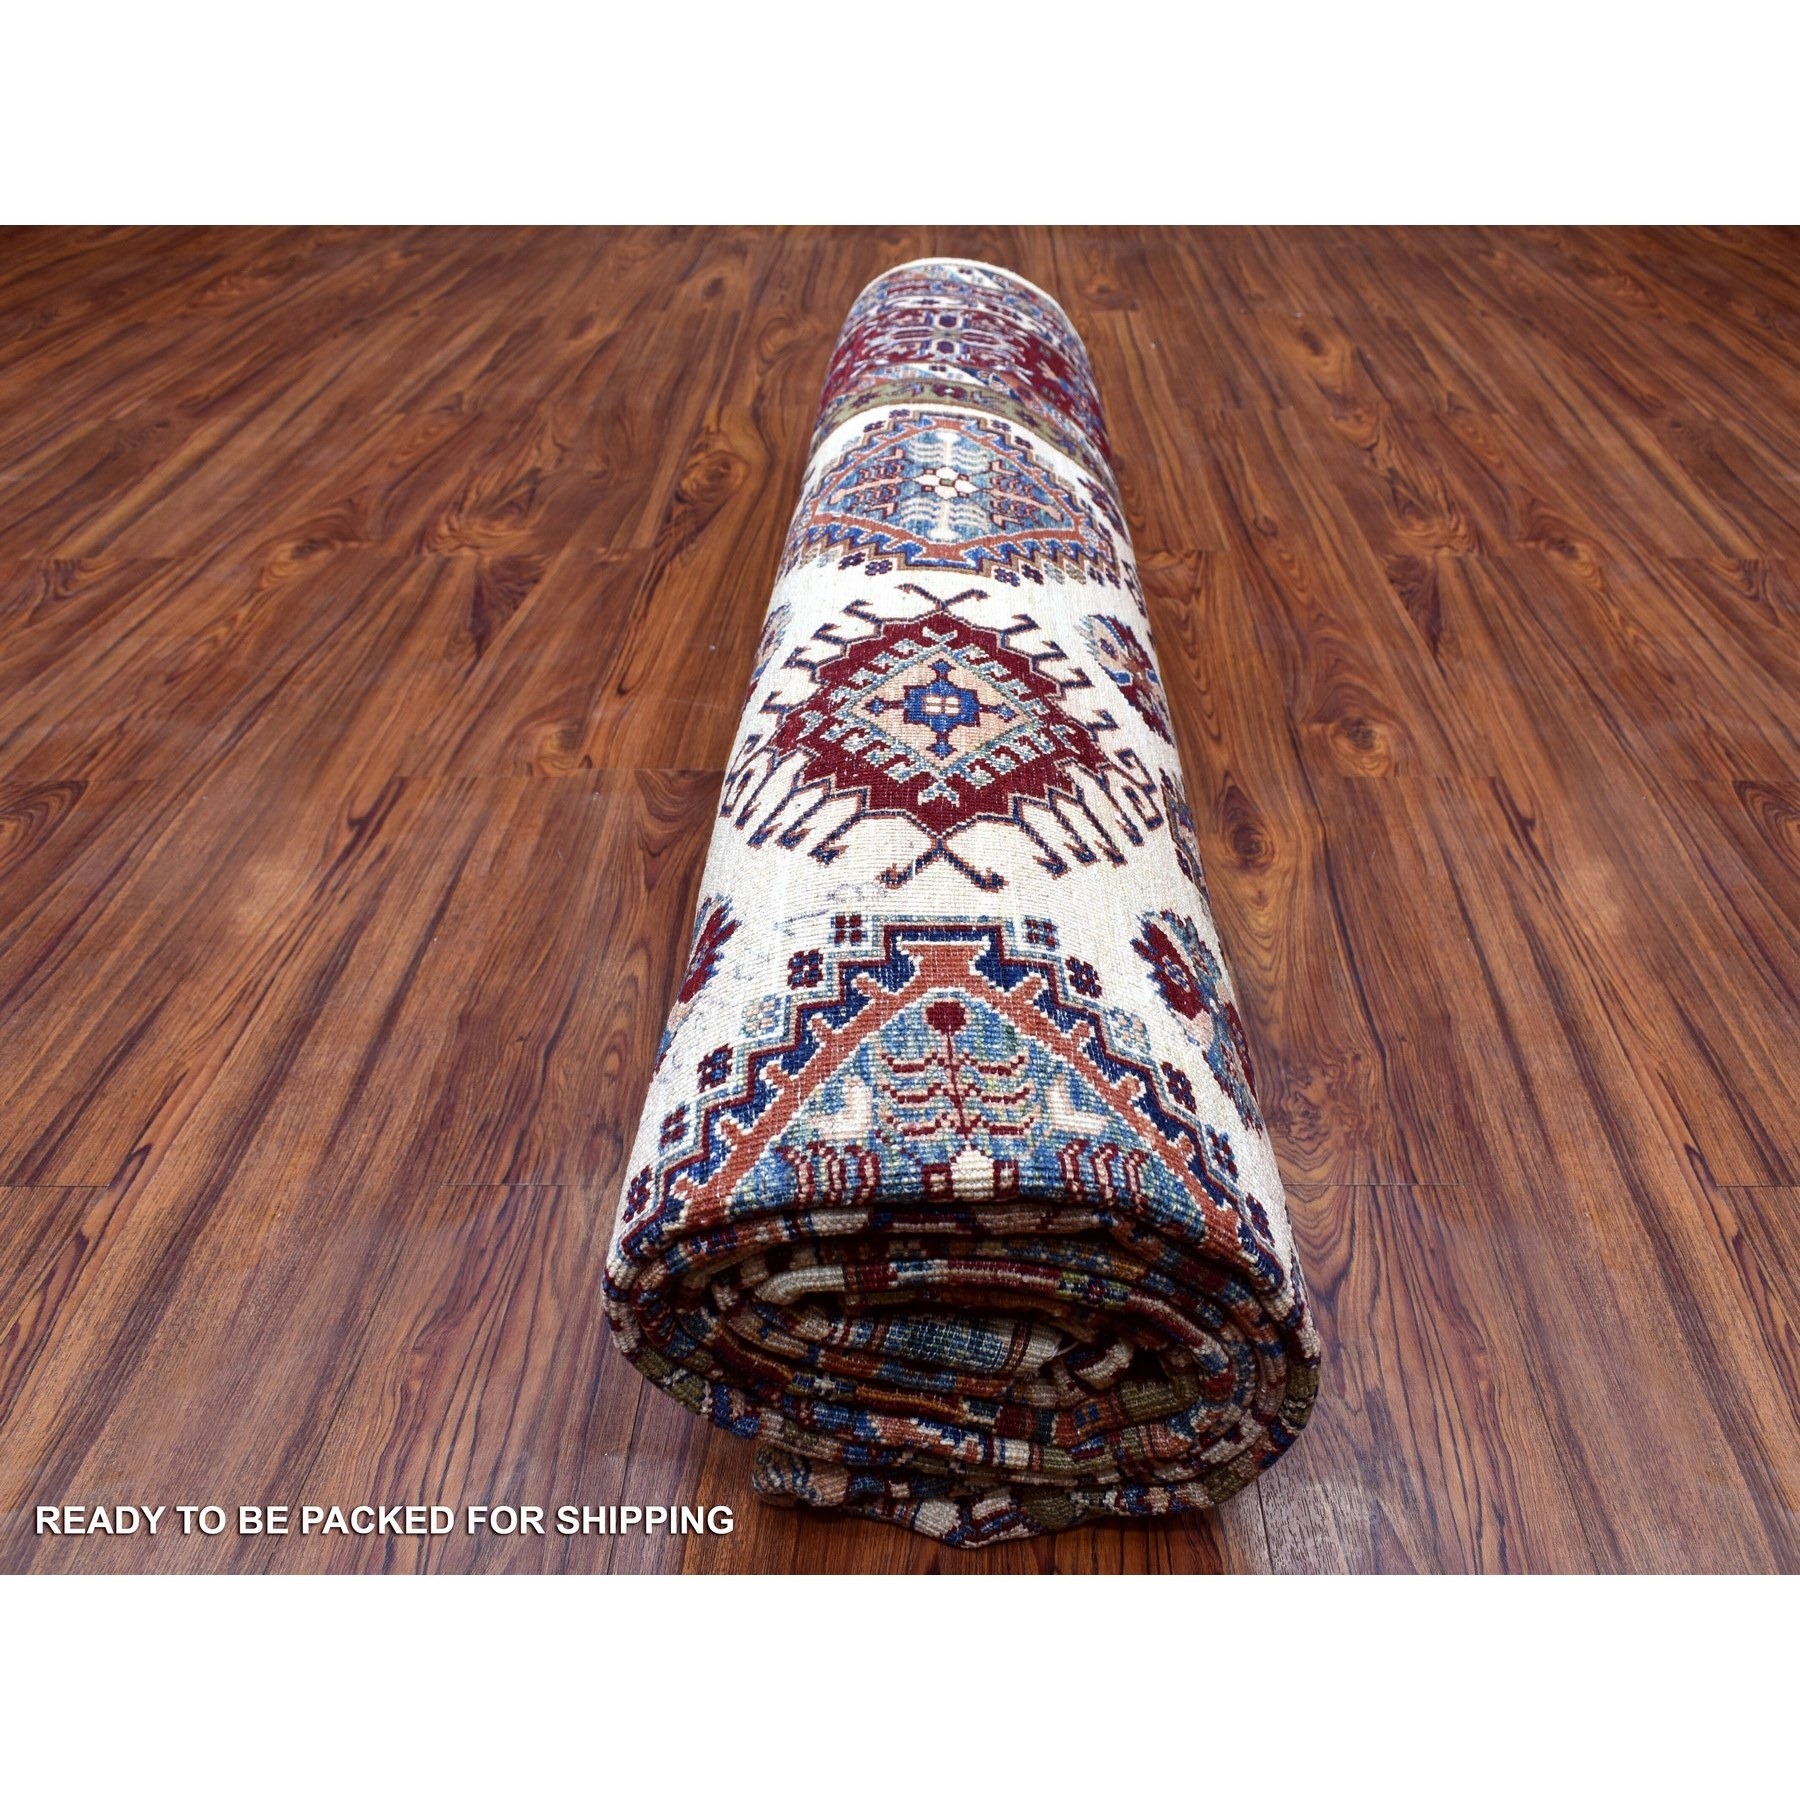 9'1"x12'4" Ivory with a Dark Red Border Super Kazak with Colorful Repetitive Medallions Afghan Shiny Wool Hand Woven Oriental Rug 